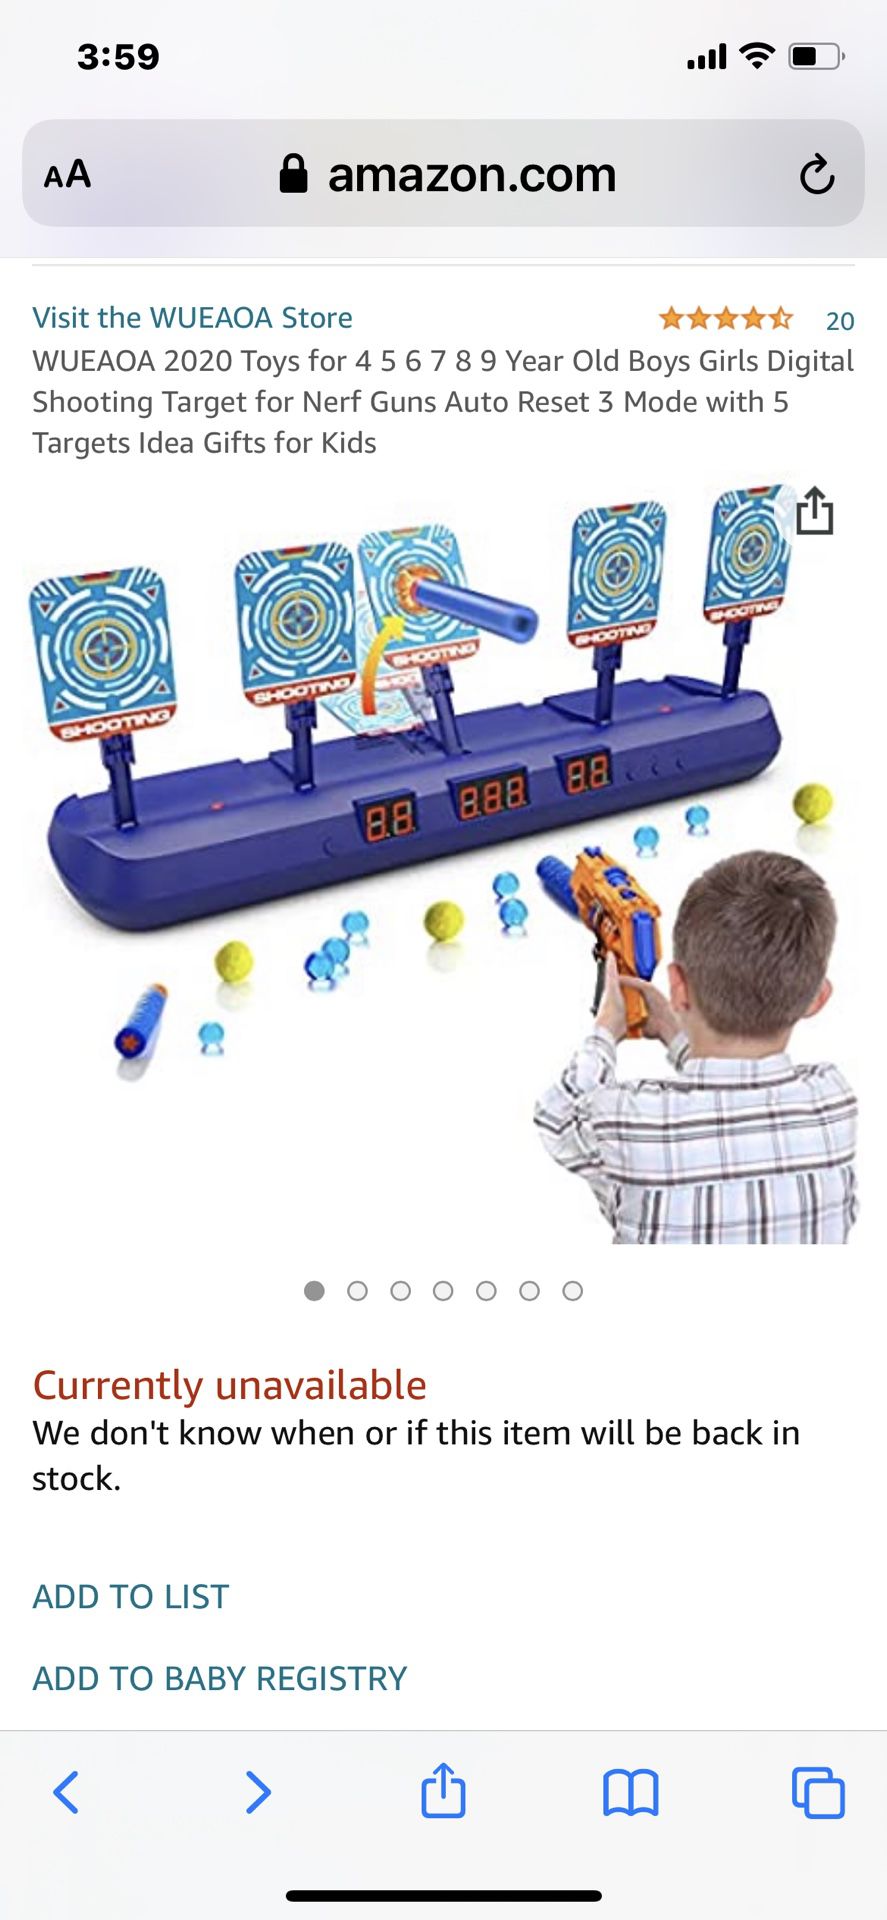 Shooting target toy for nerf gun. Just target, no gun or bullets included